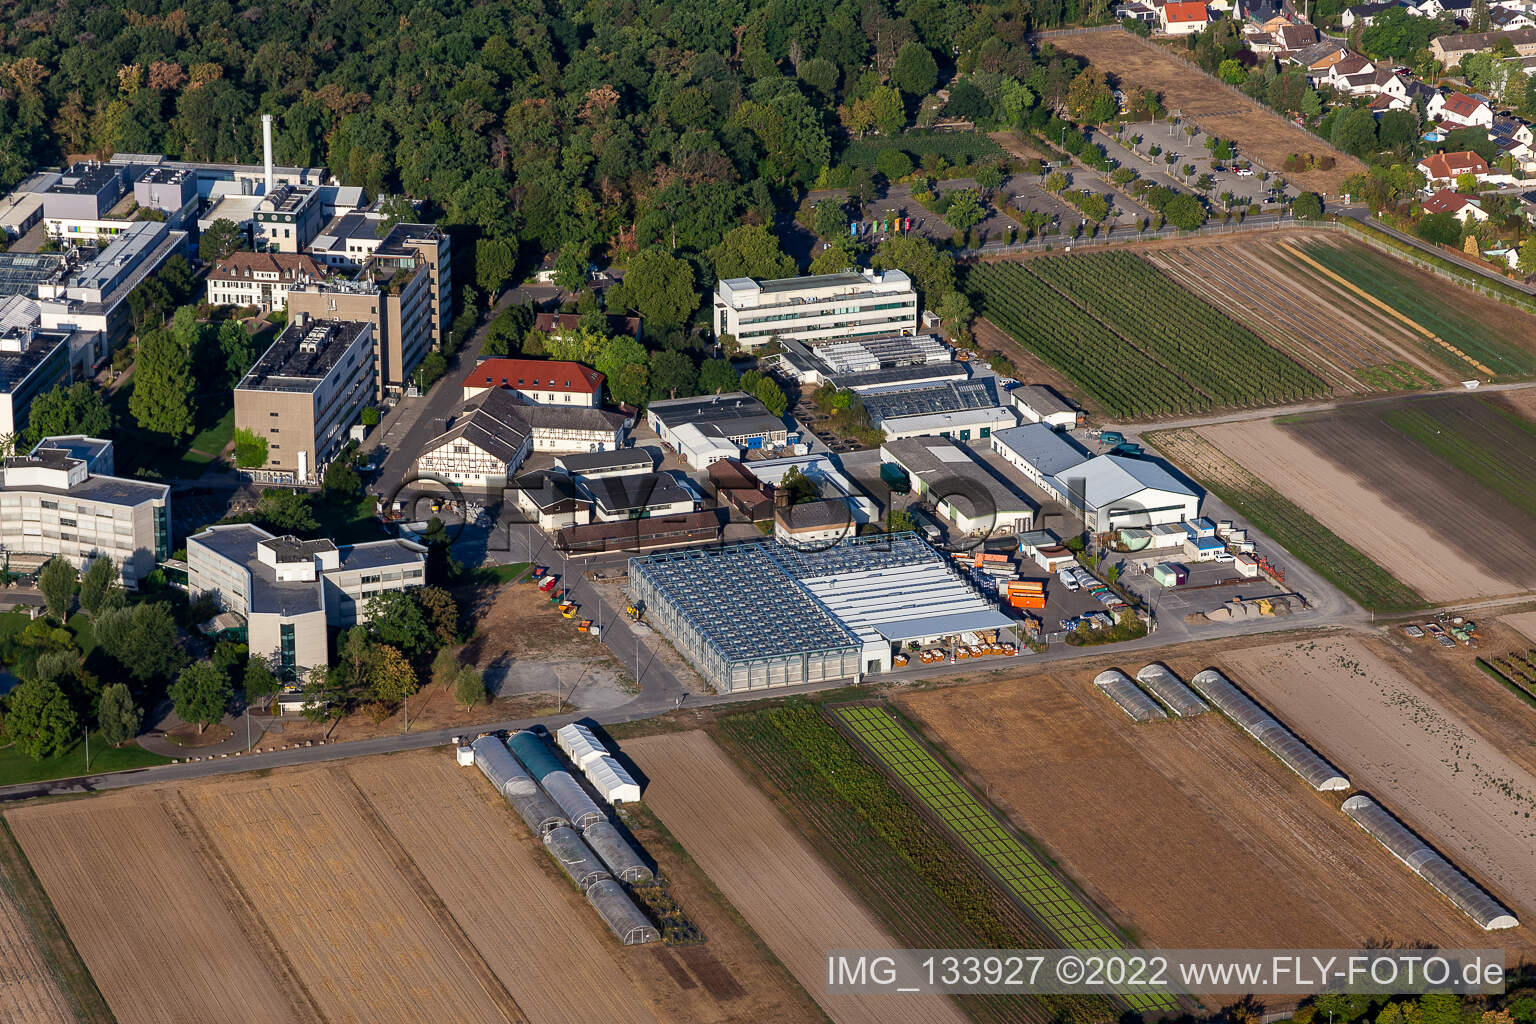 BASF Agricultural Center in Limburgerhof in the state Rhineland-Palatinate, Germany seen from above